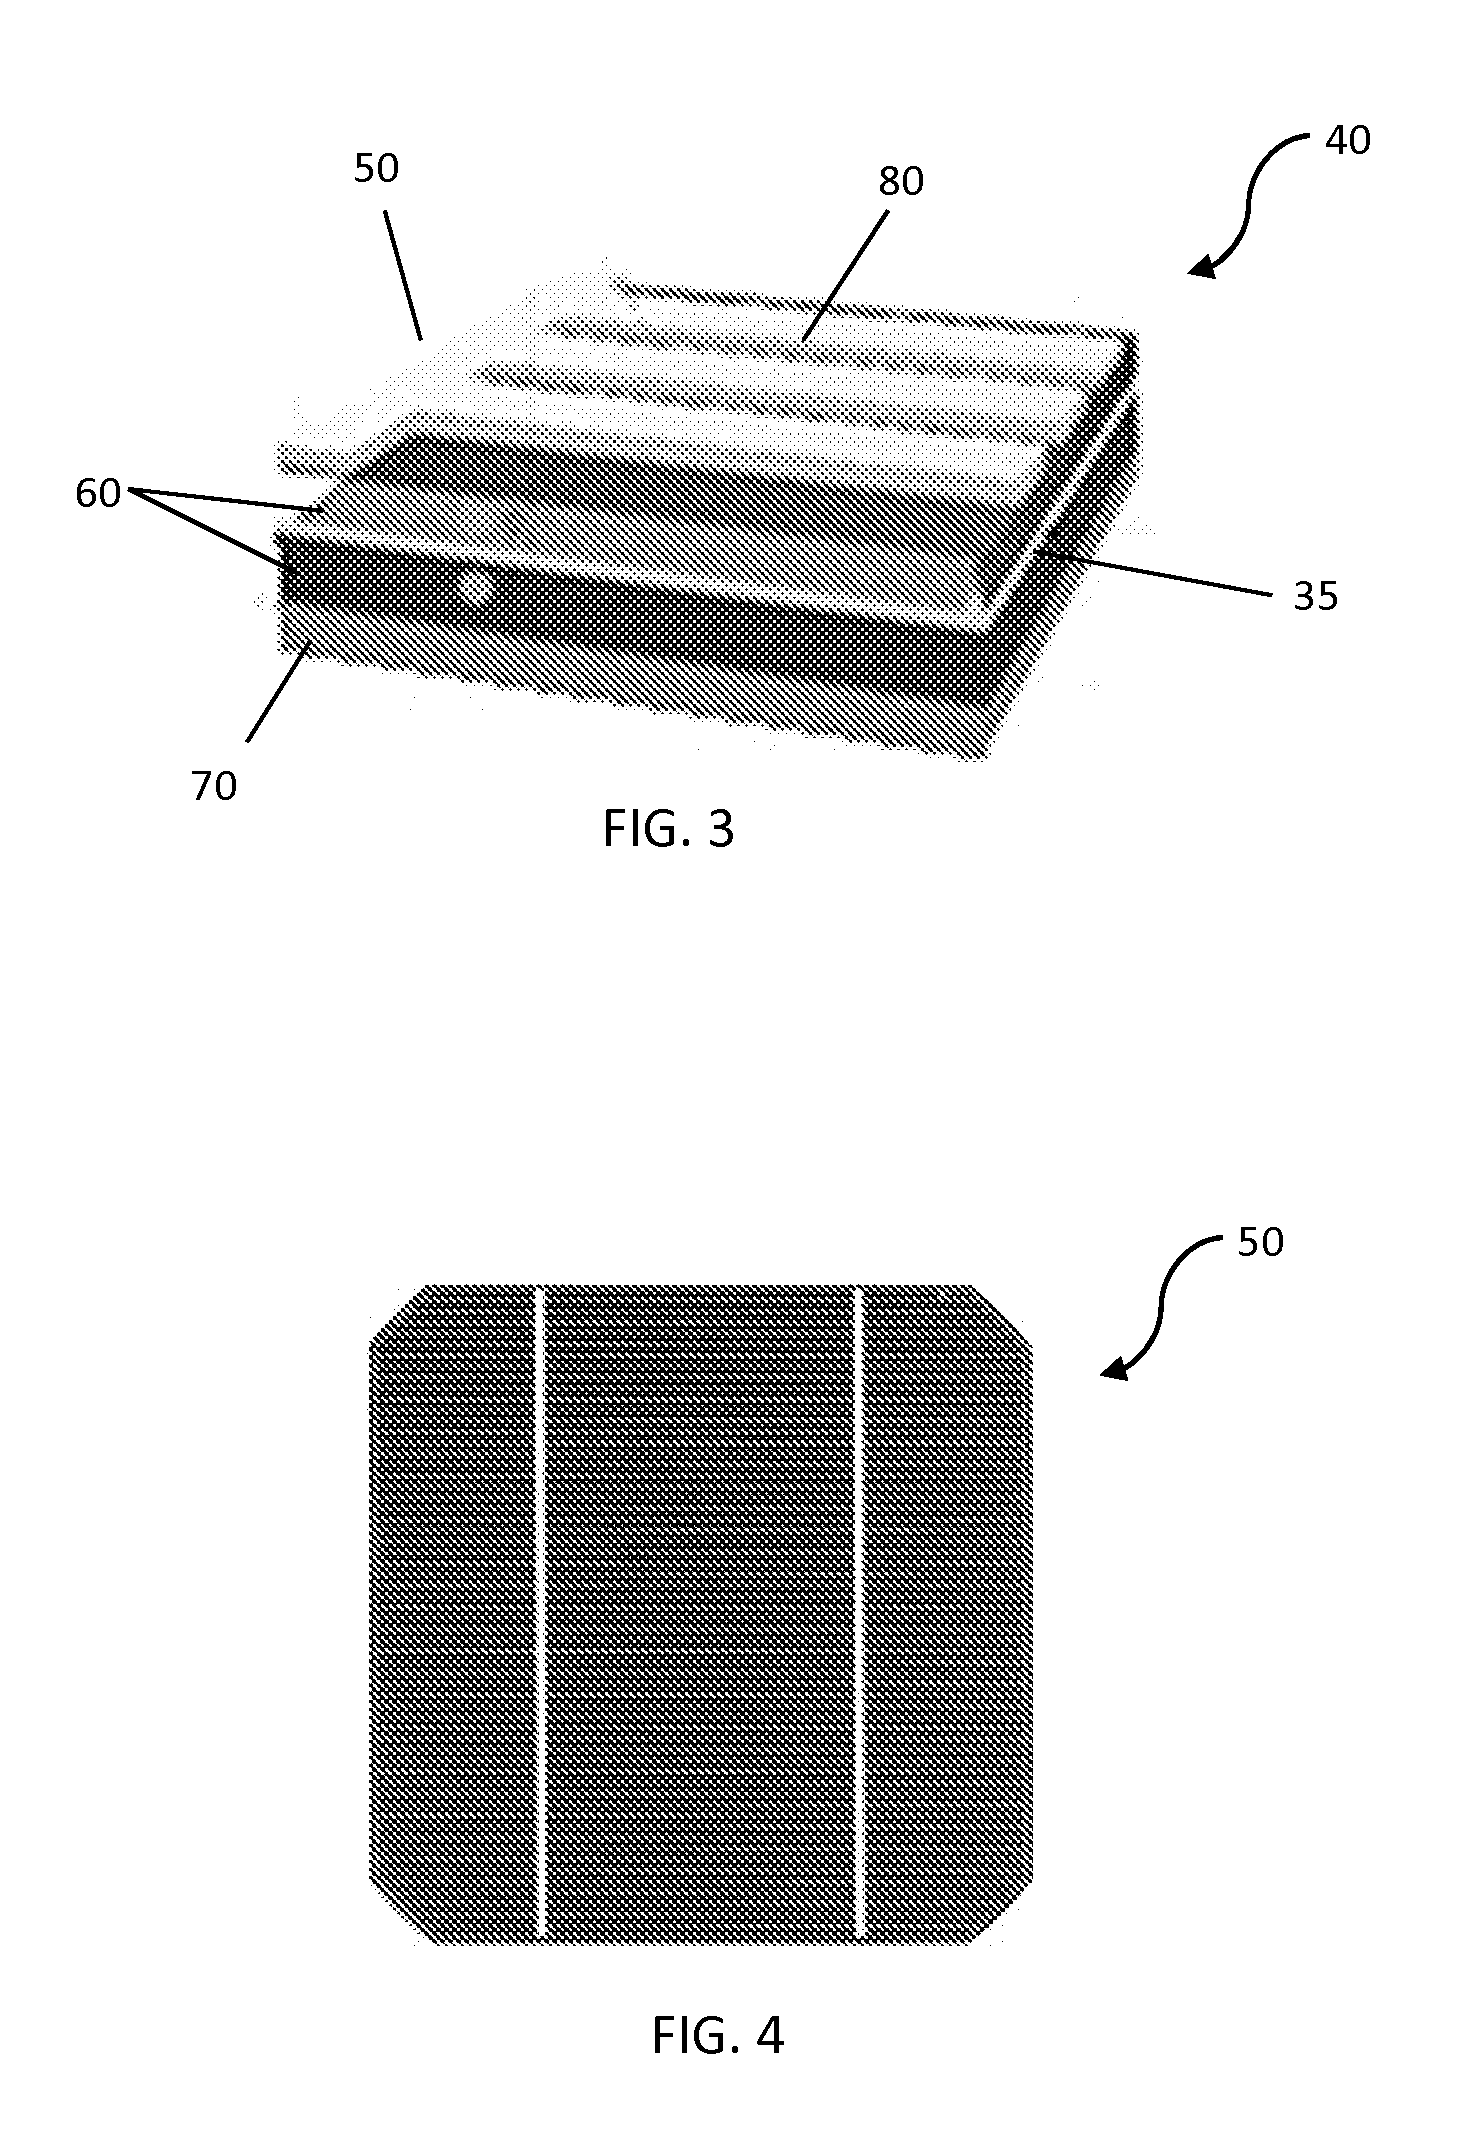 Stand-Alone Solar Power Charger Directly Coupling to Portable Electronic Devices